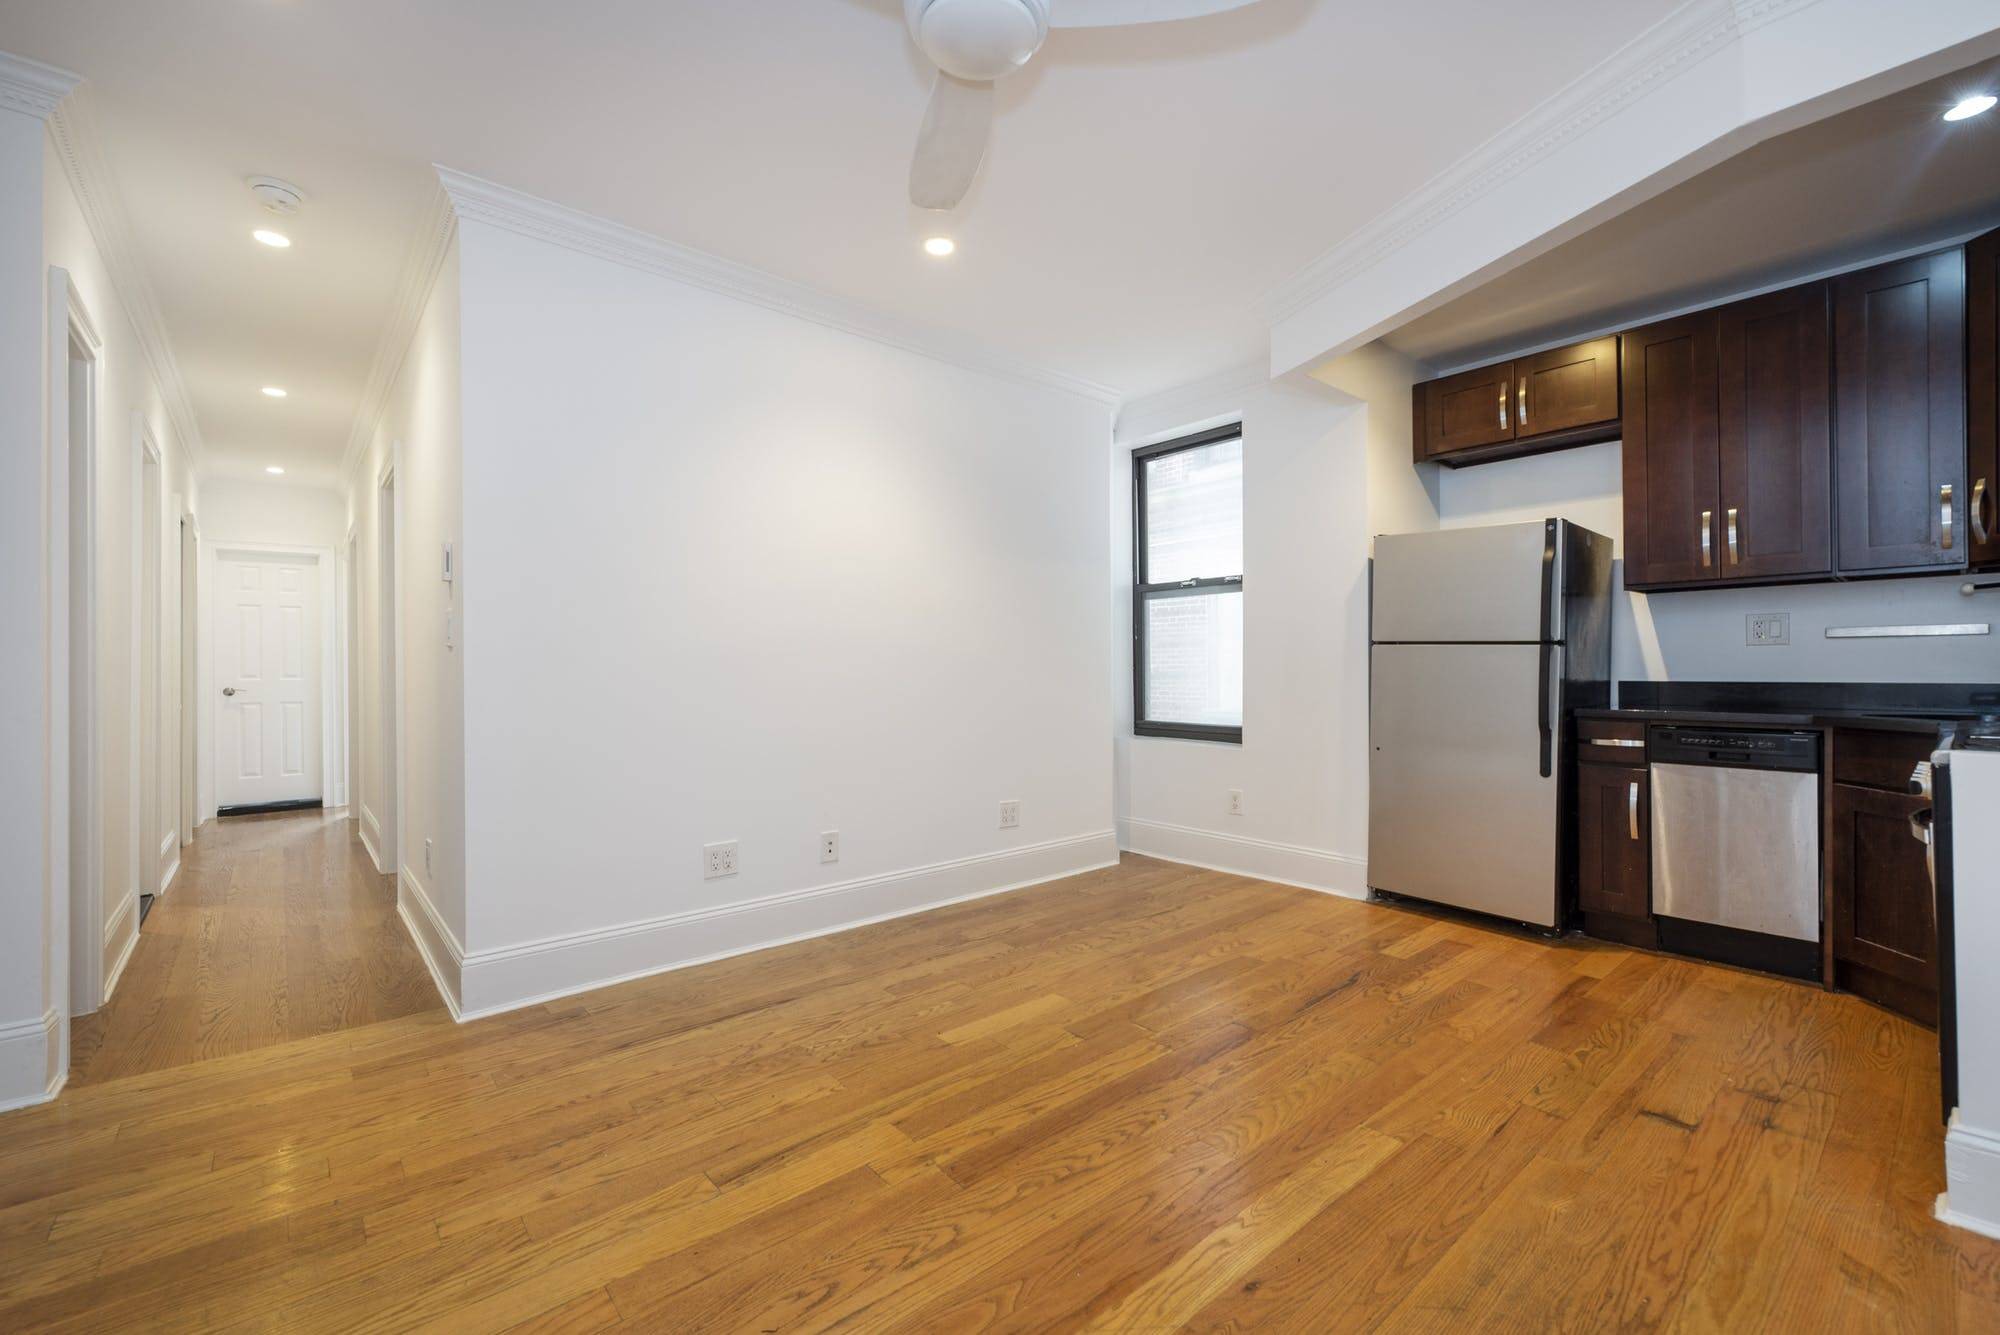 Welcome to 1059 Union Street 1059 Union Street is a collective of luxury rental apartments, pridefully overlooking Prospect Park in prime Crown Heights.